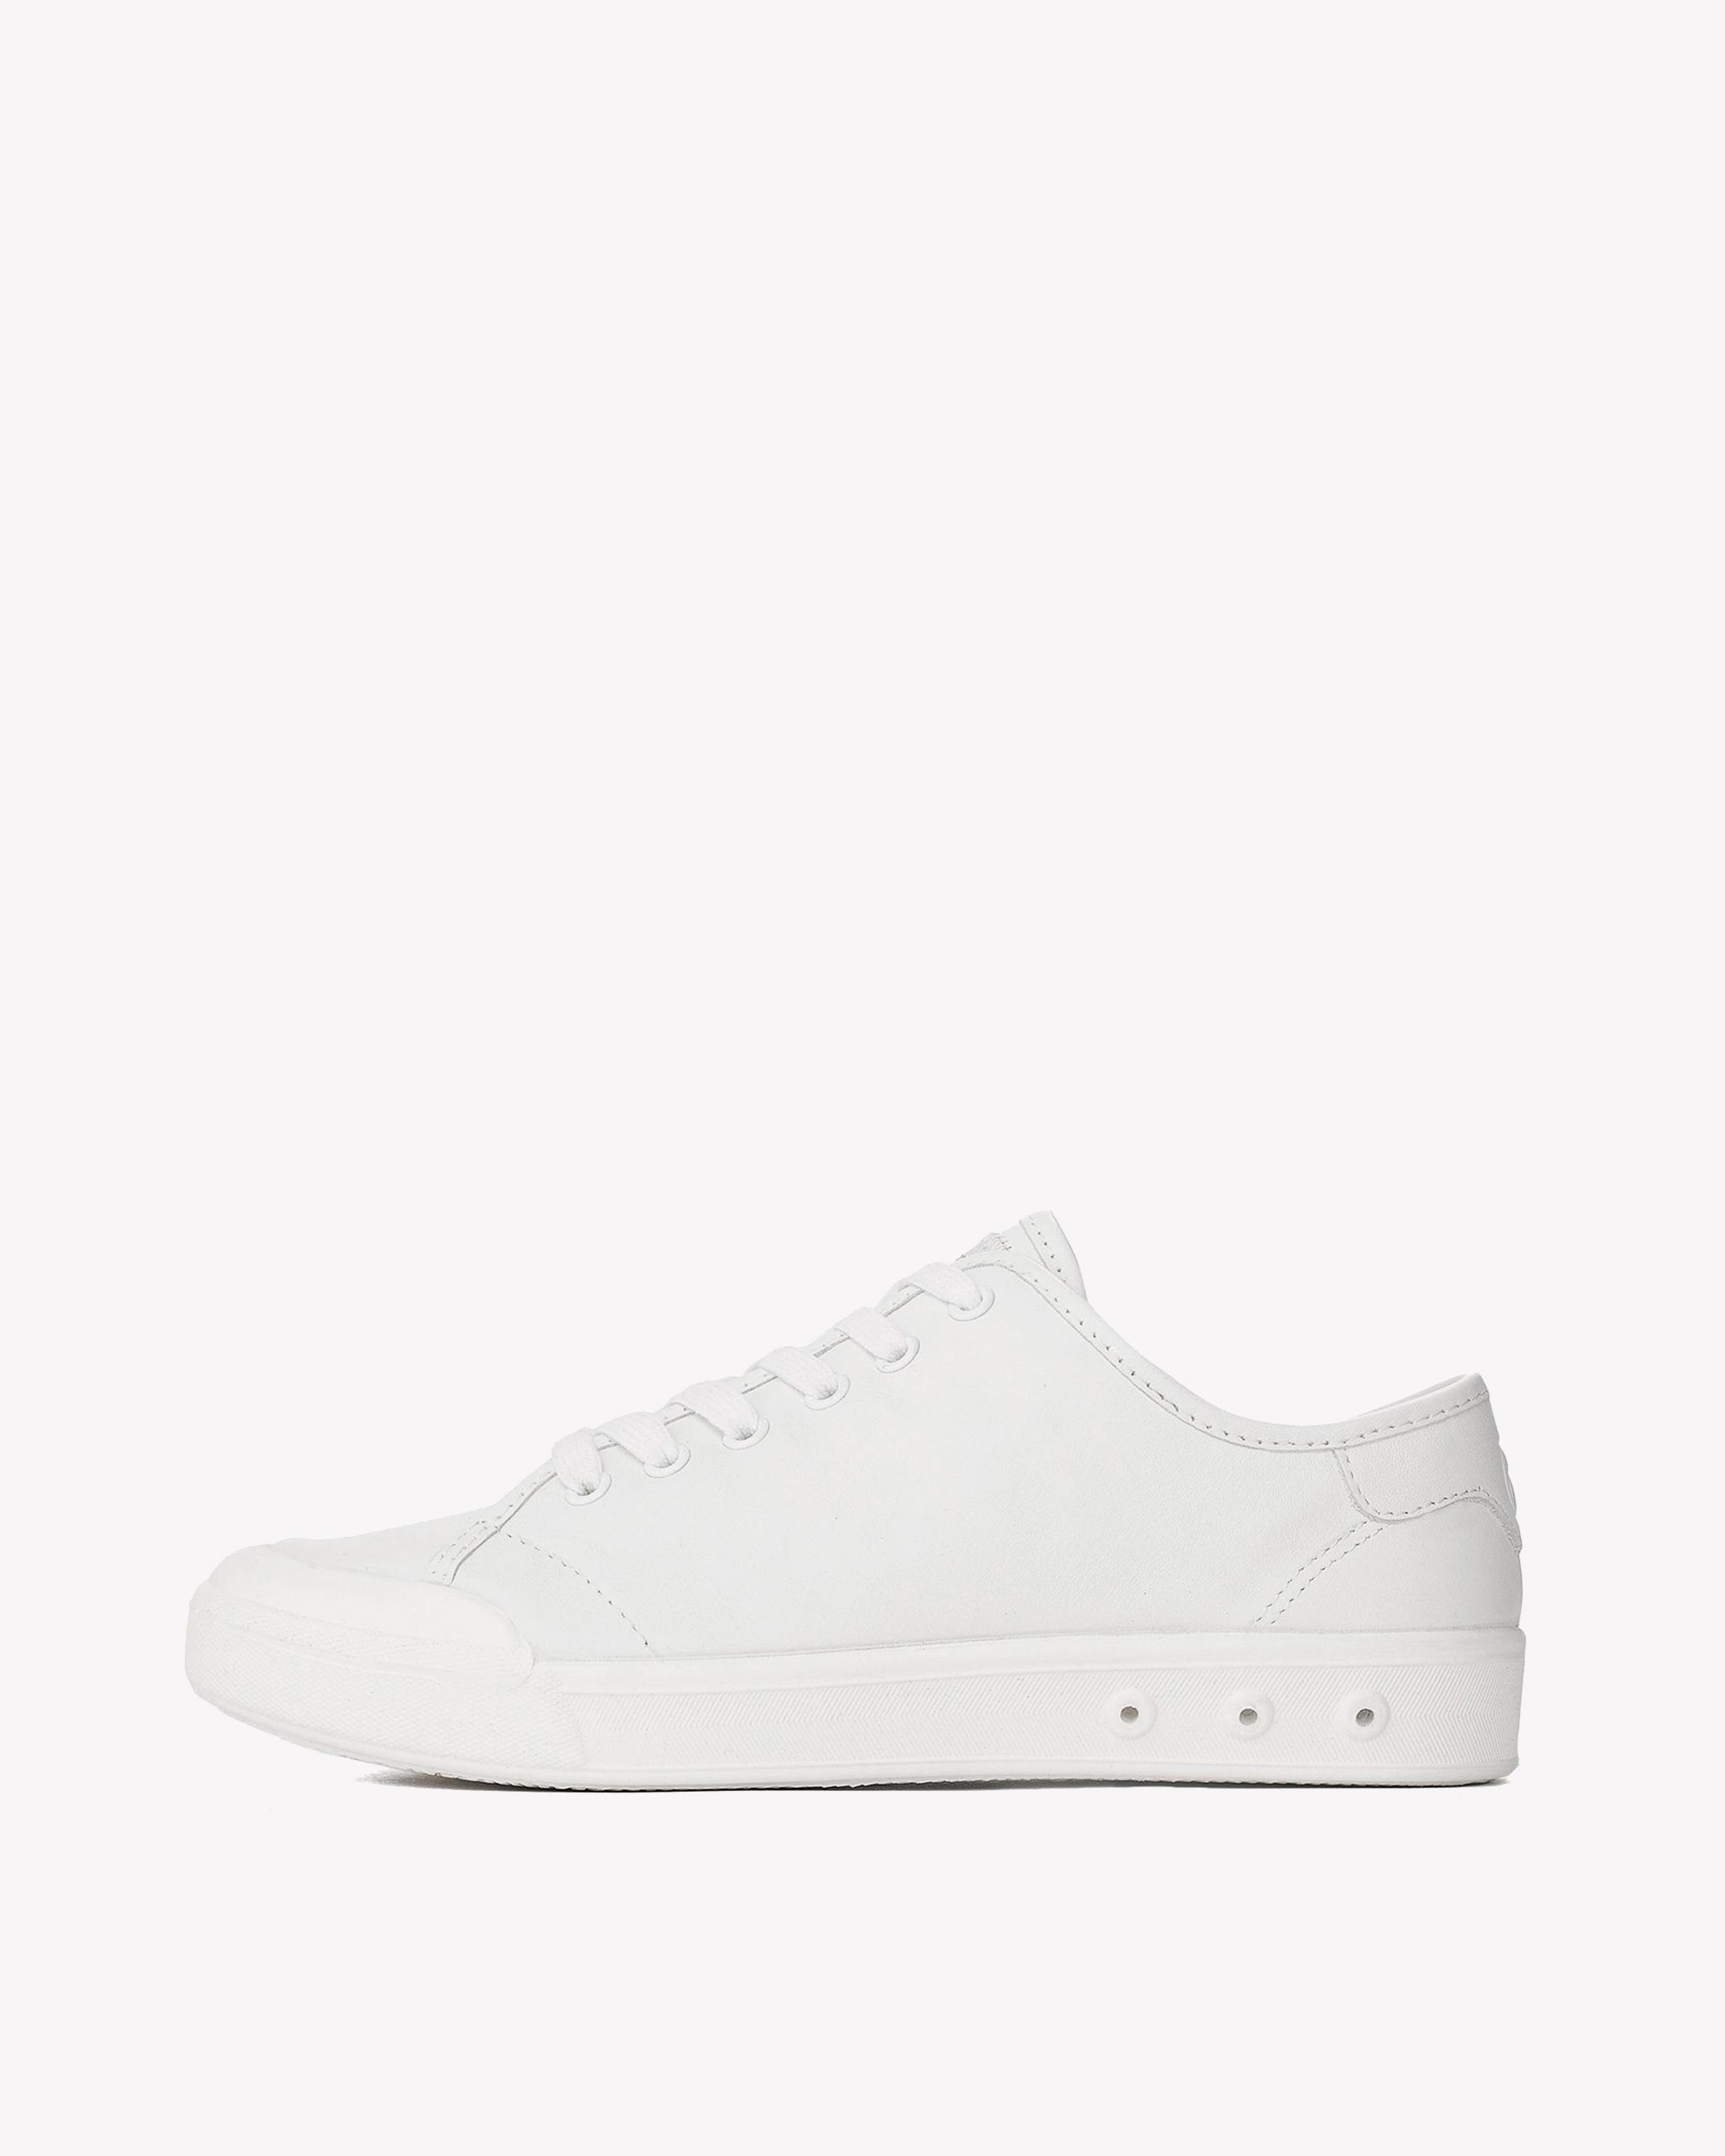 rag and bone standard issue sneakers